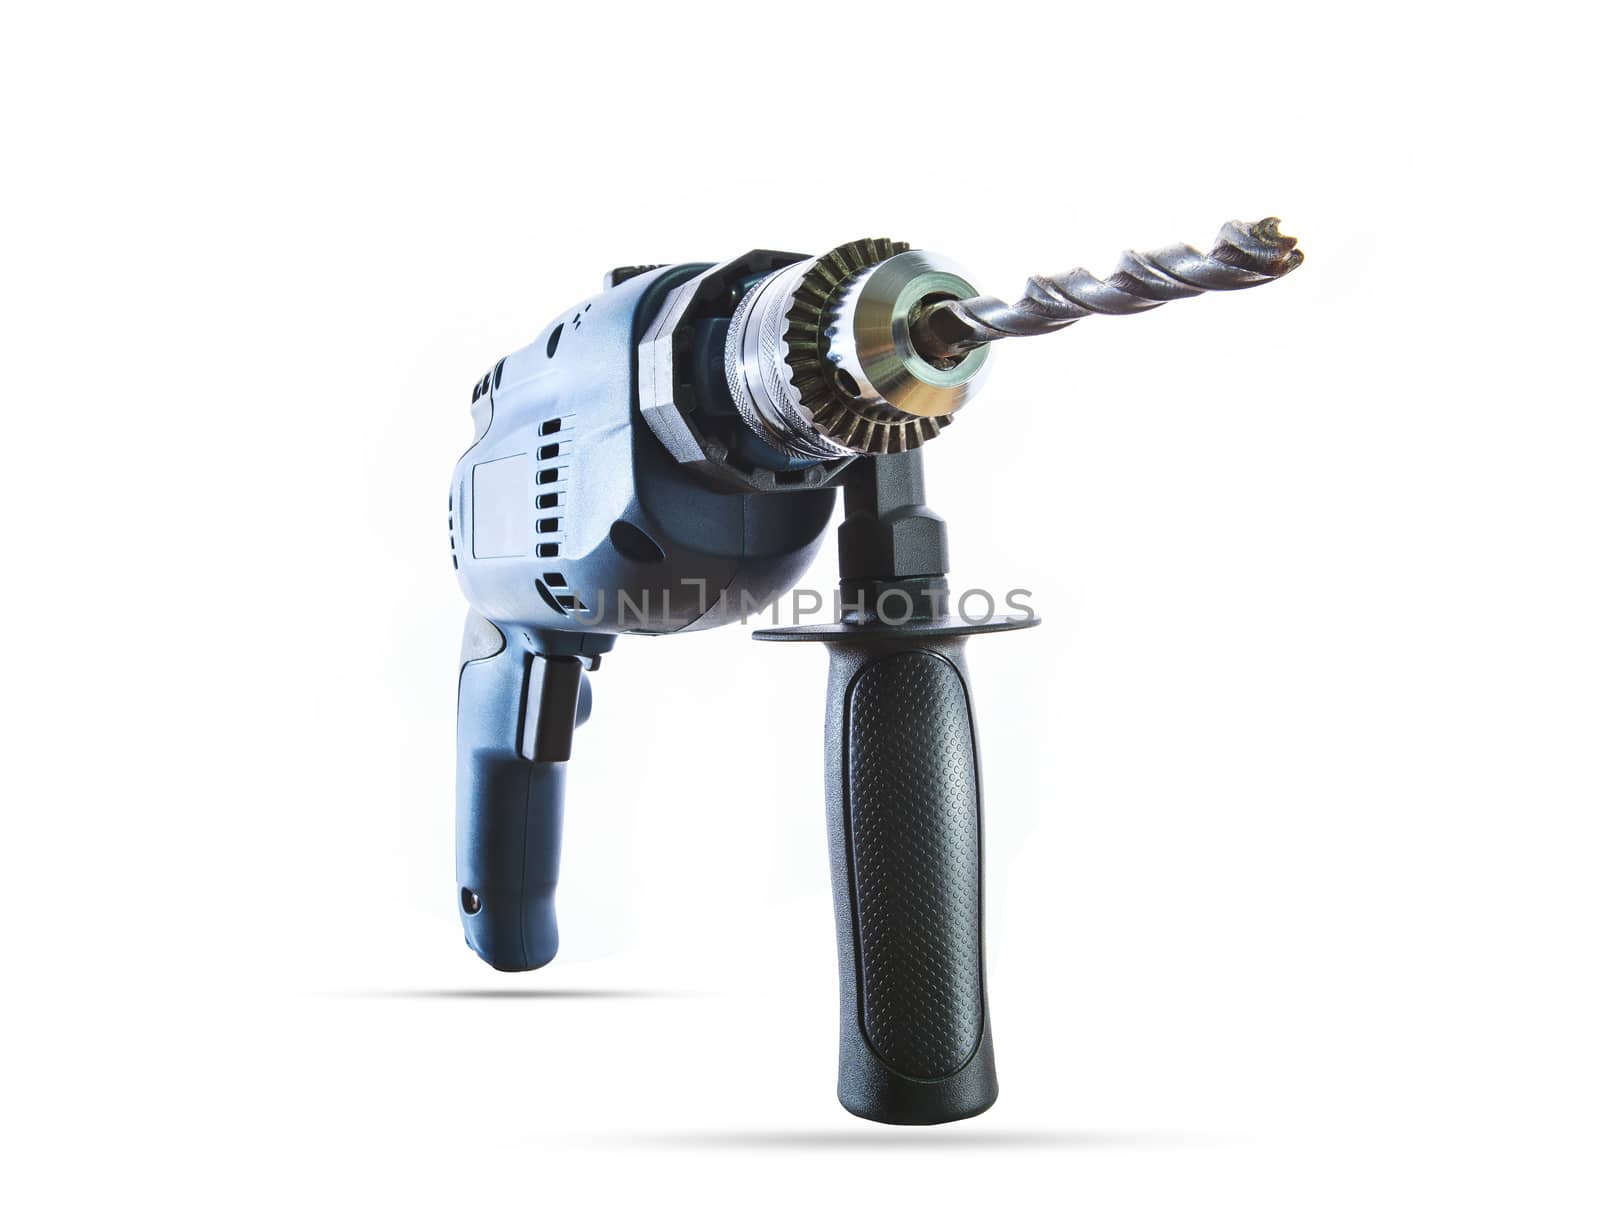 studio lighting close up and perspective distortion of electric hand drilling on white background use for industry tool home working equipment and diy home work instrument tipic